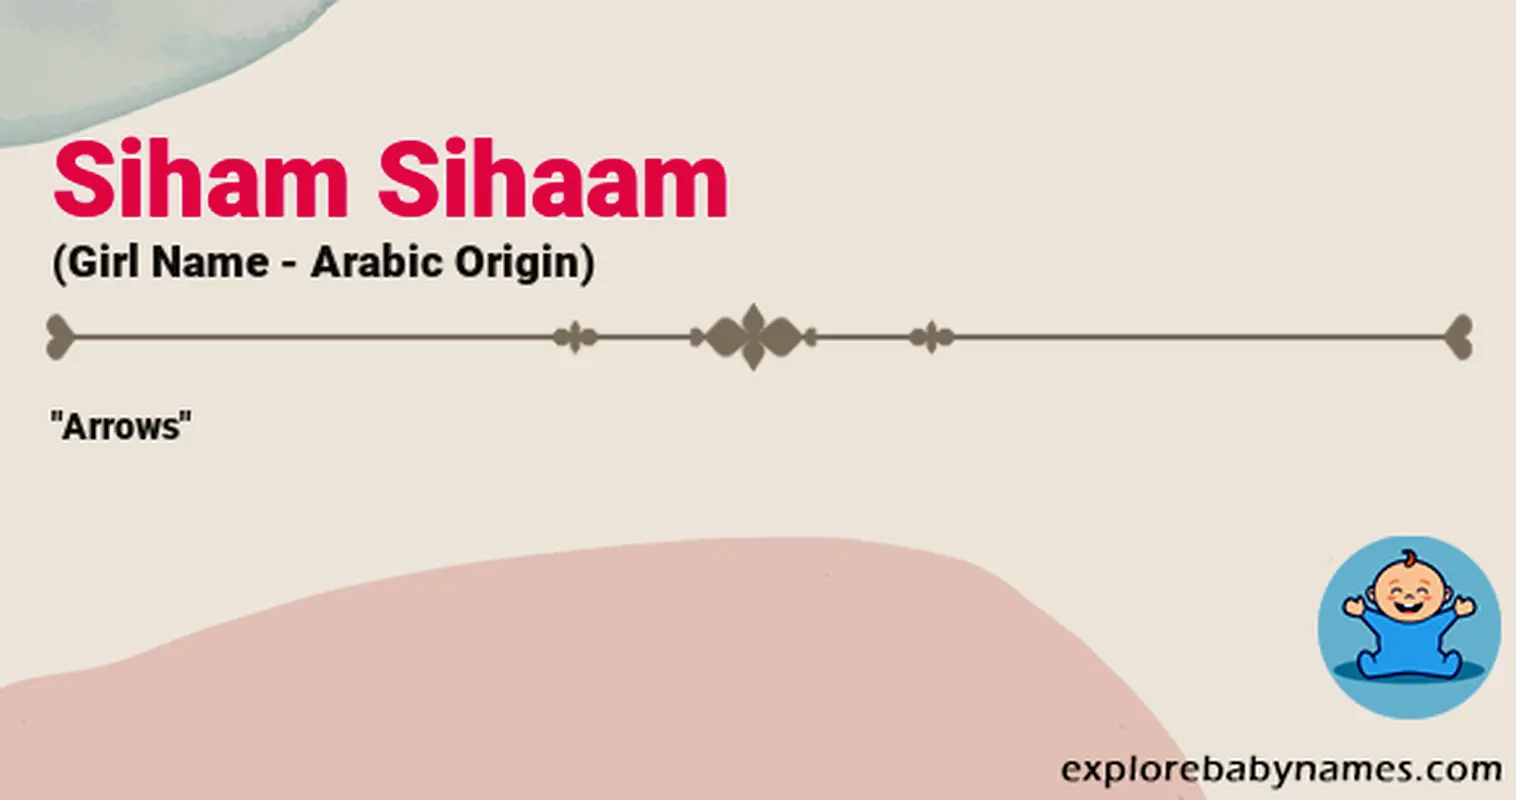 Meaning of Siham Sihaam